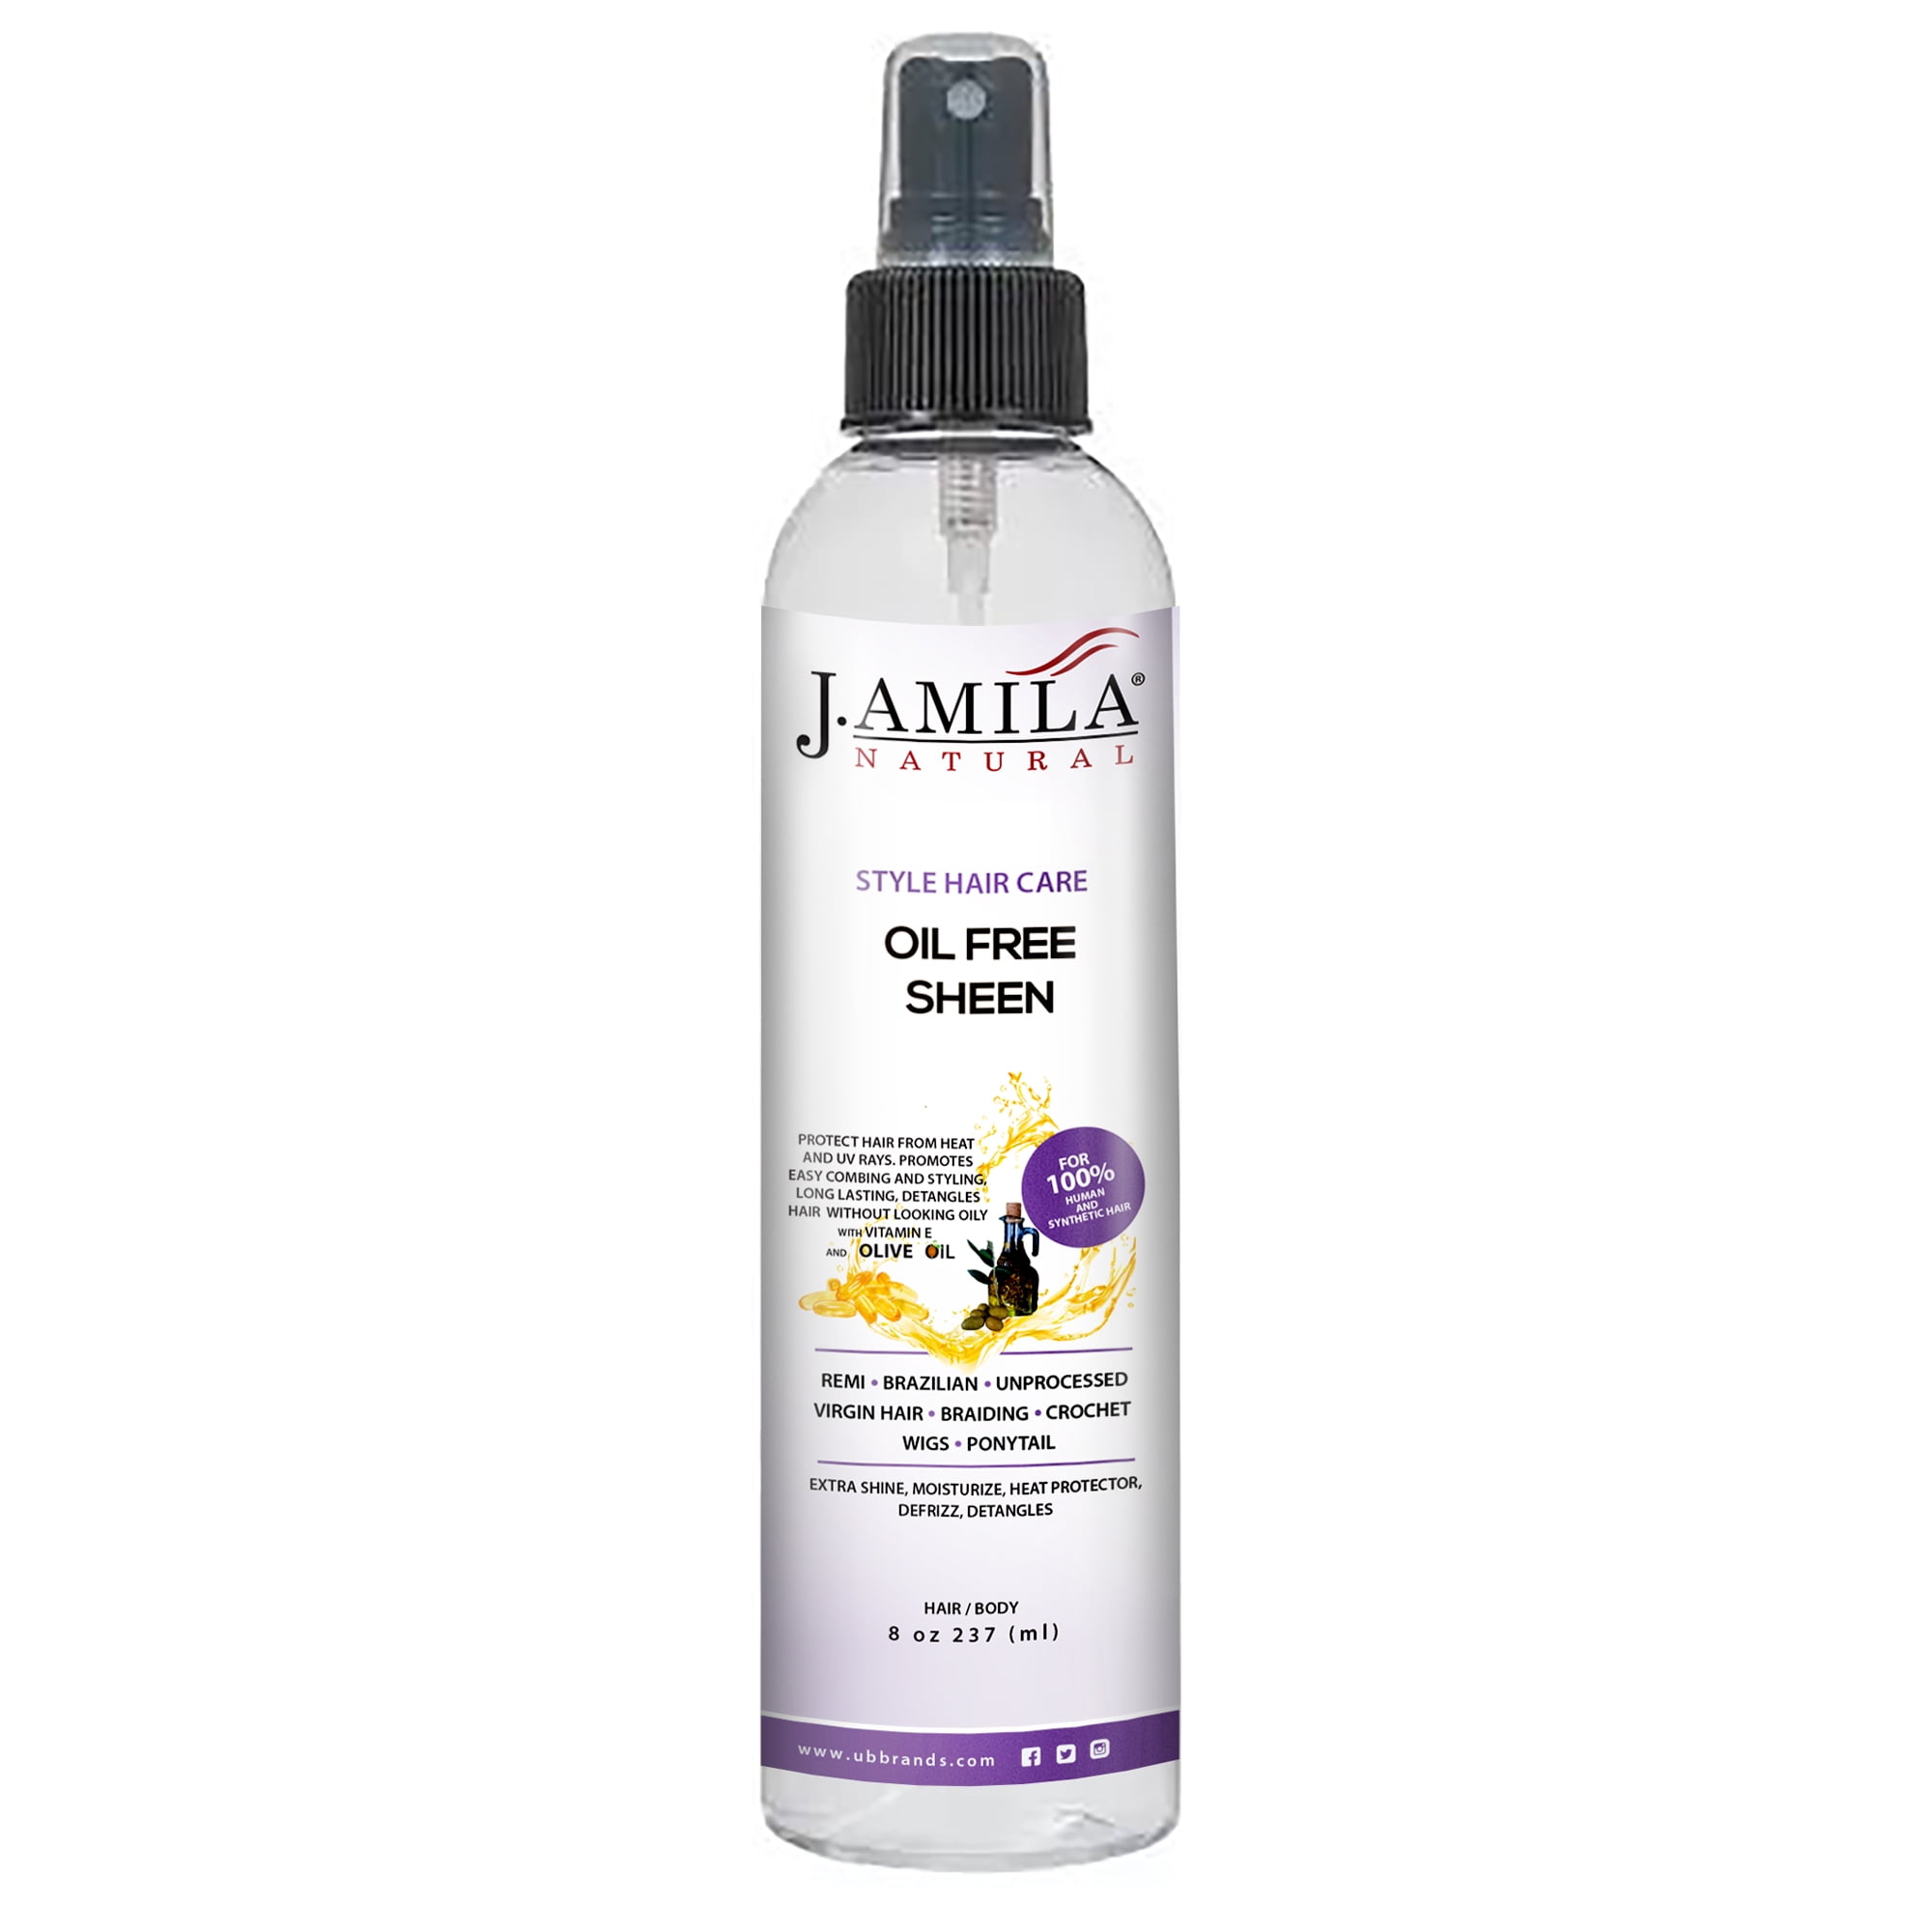 OLIVE OIL Hair Lotion - Lotion Hydratante 251ML